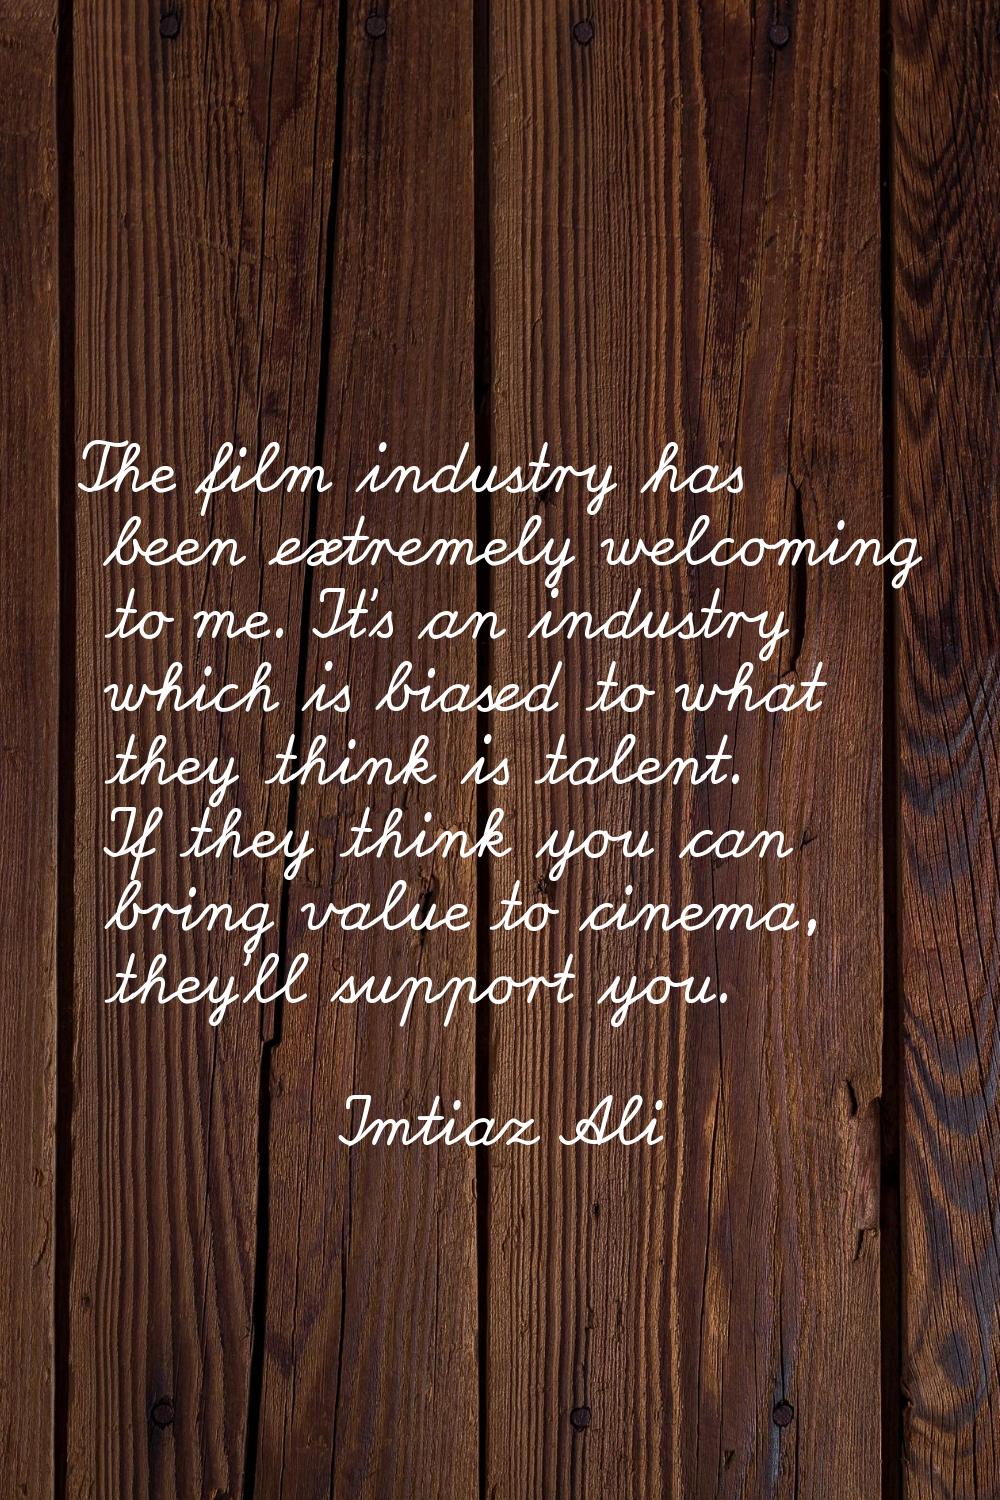 The film industry has been extremely welcoming to me. It's an industry which is biased to what they